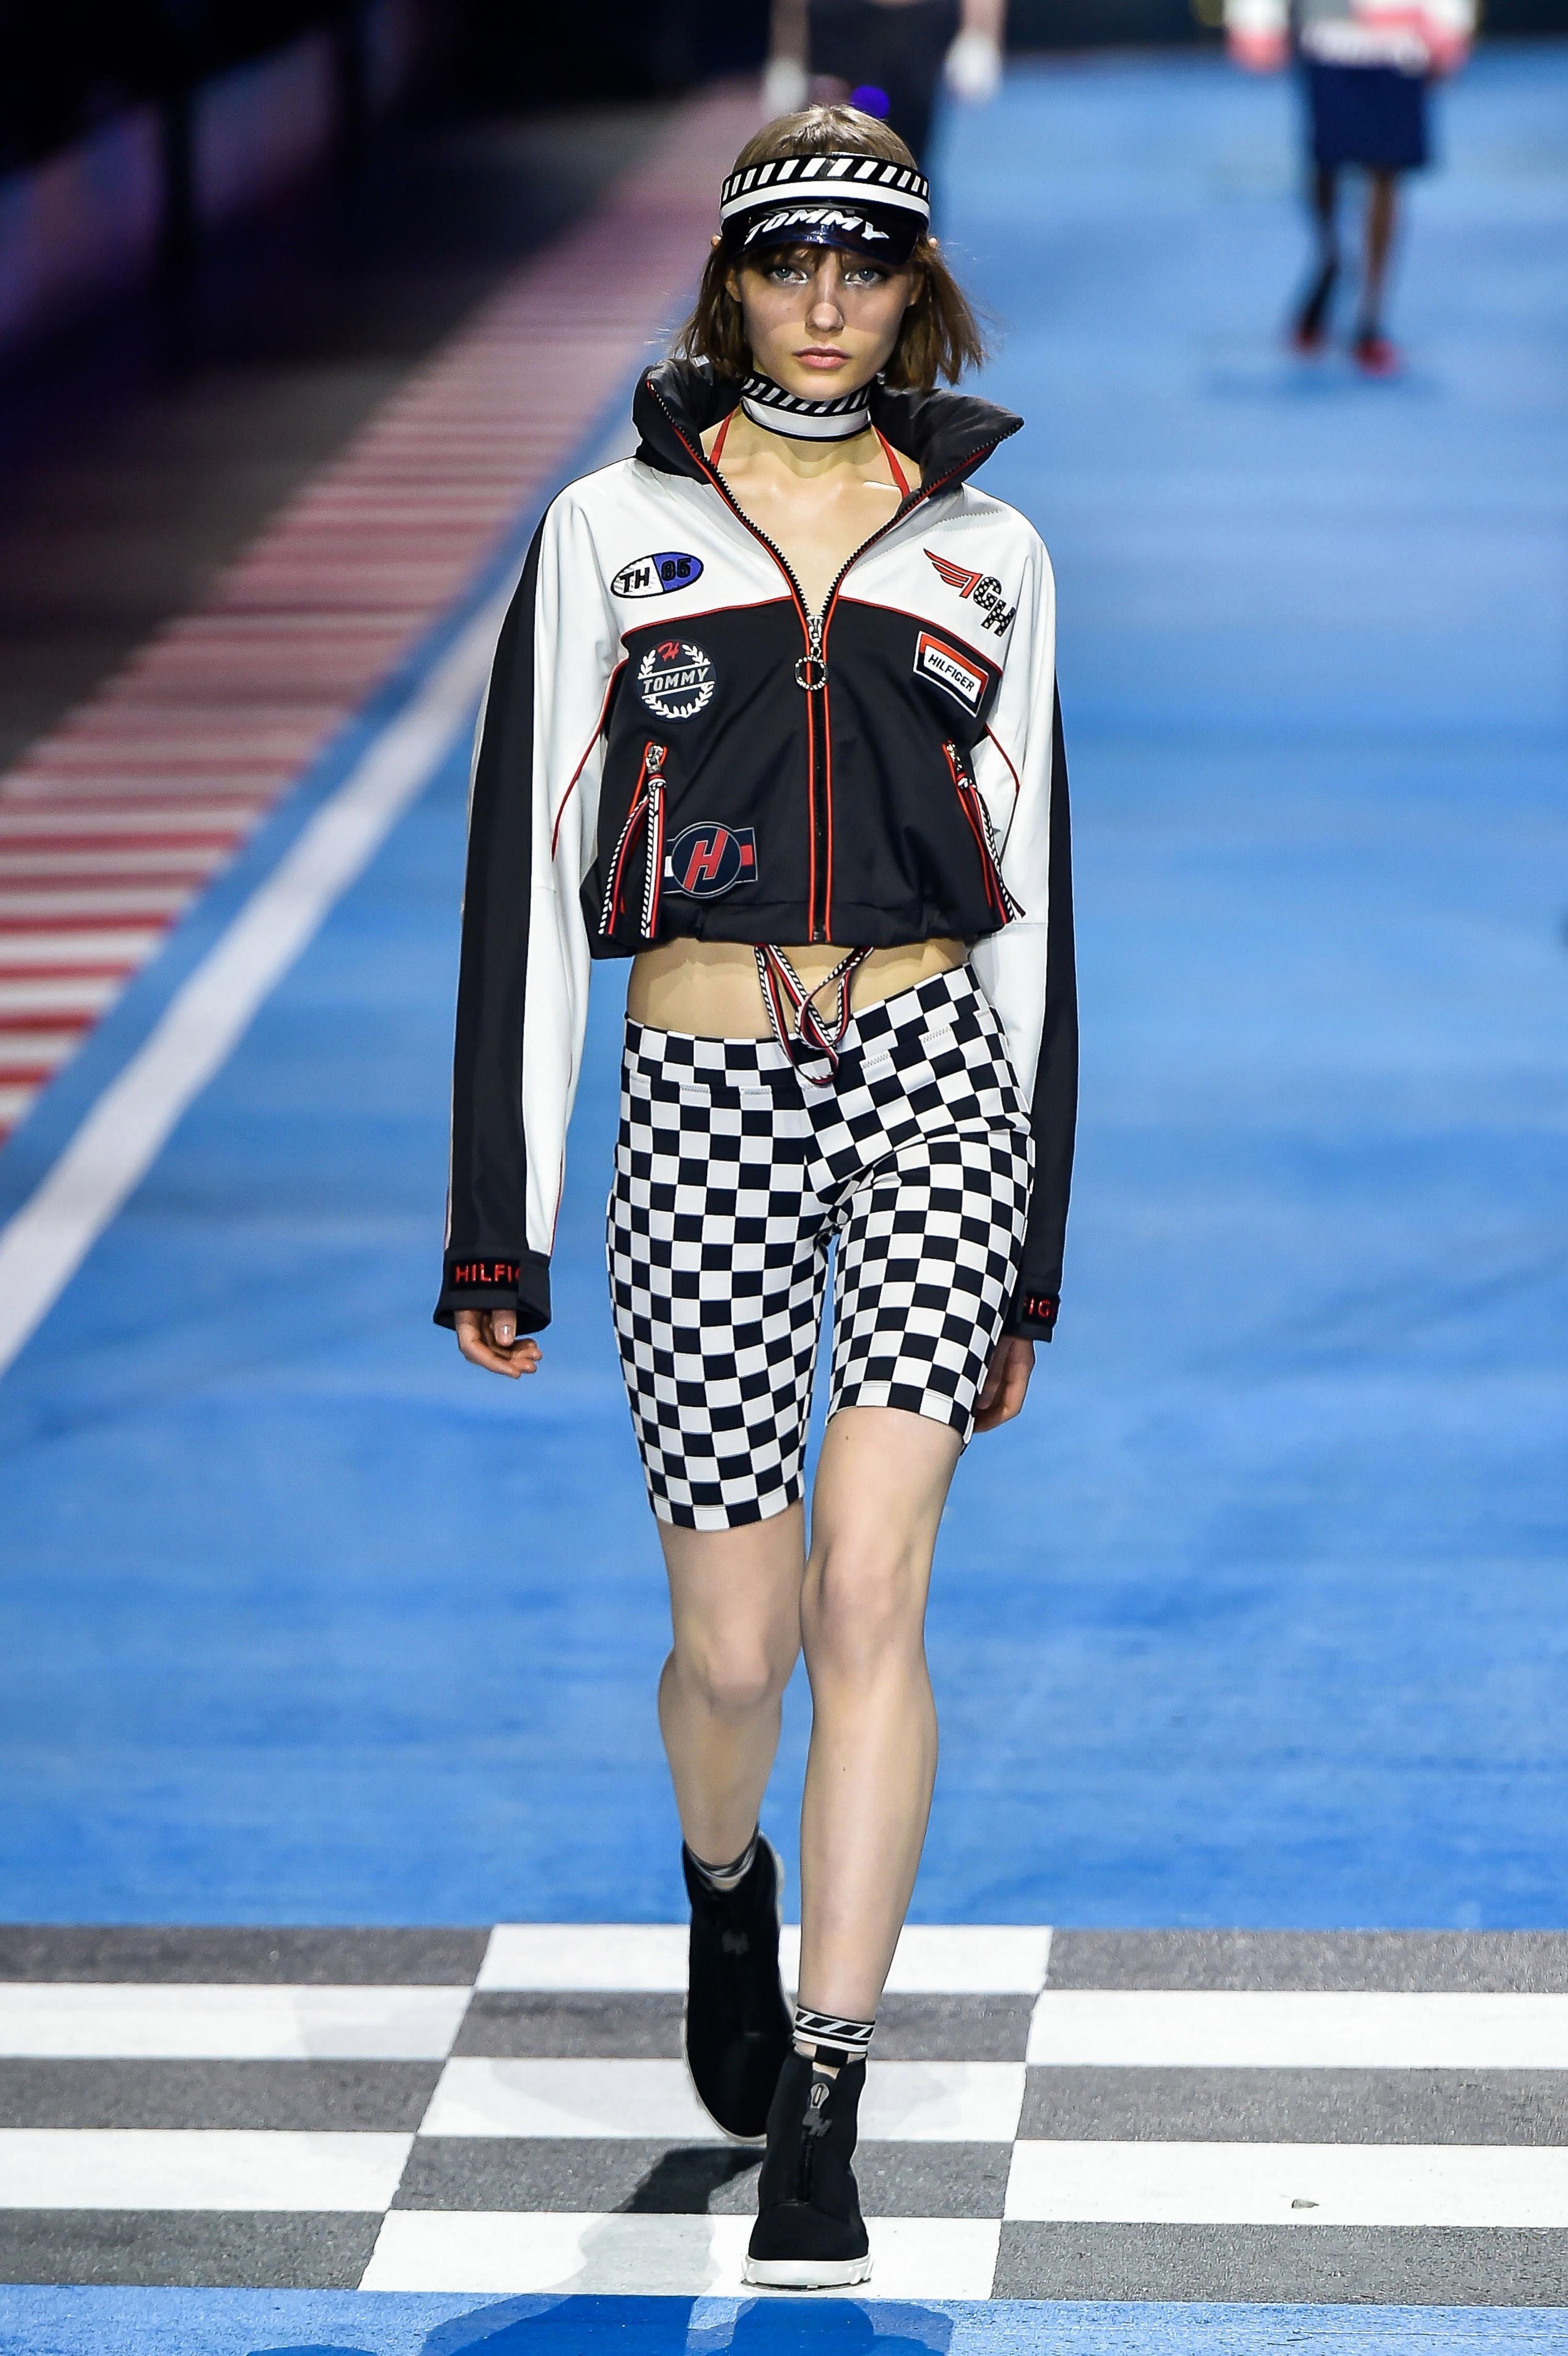 of motorsports high fashion listicle **